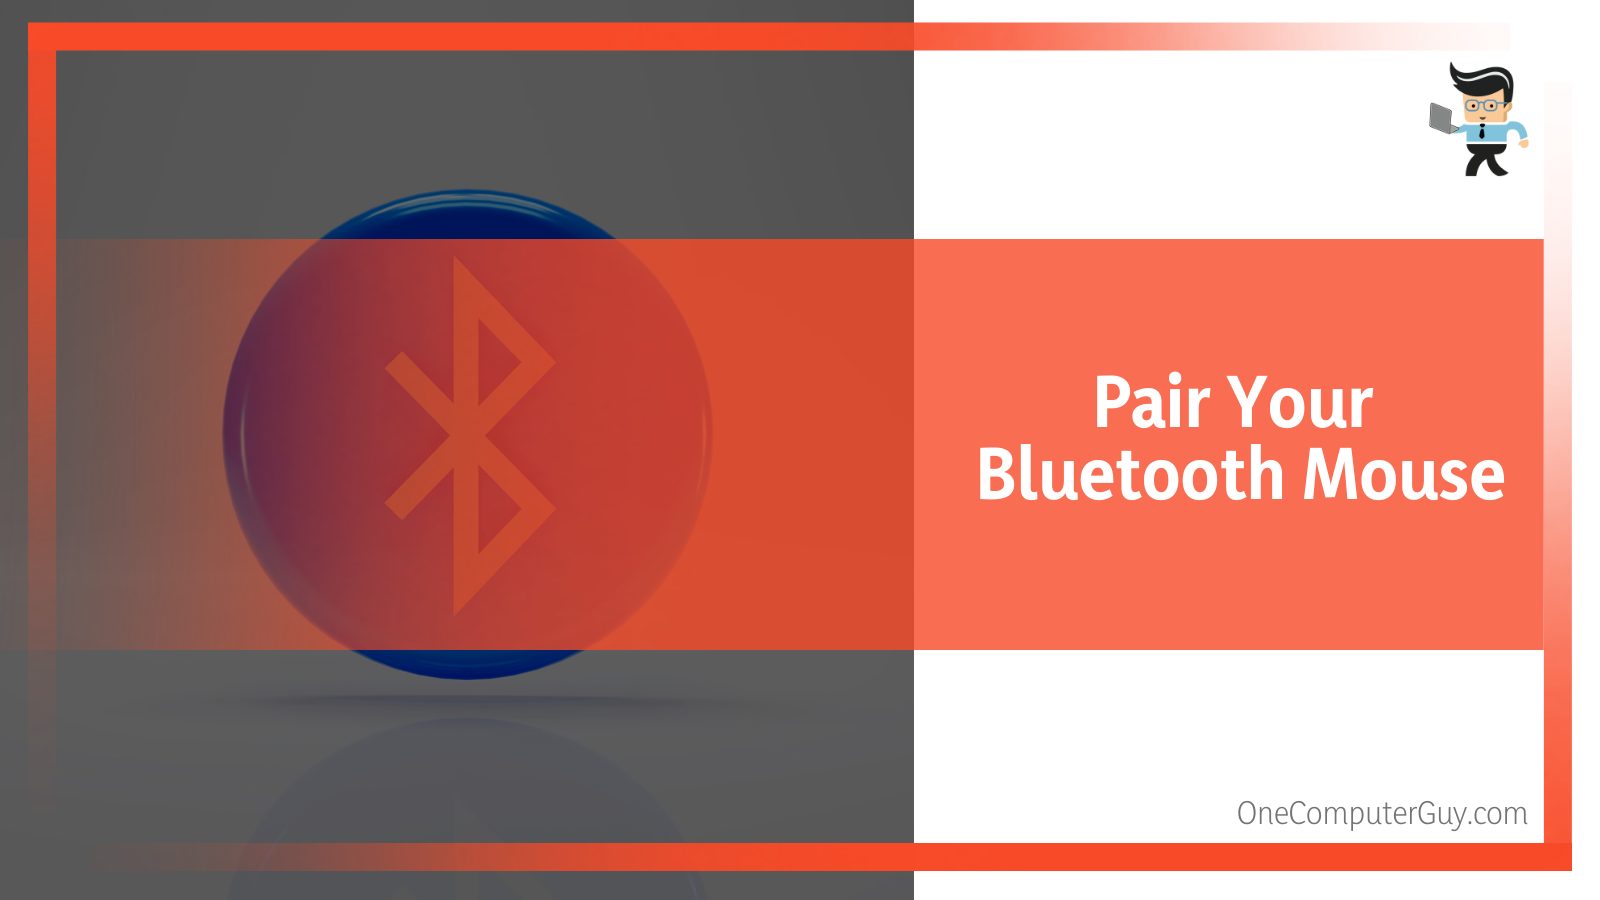 Pair your Bluetooth Device